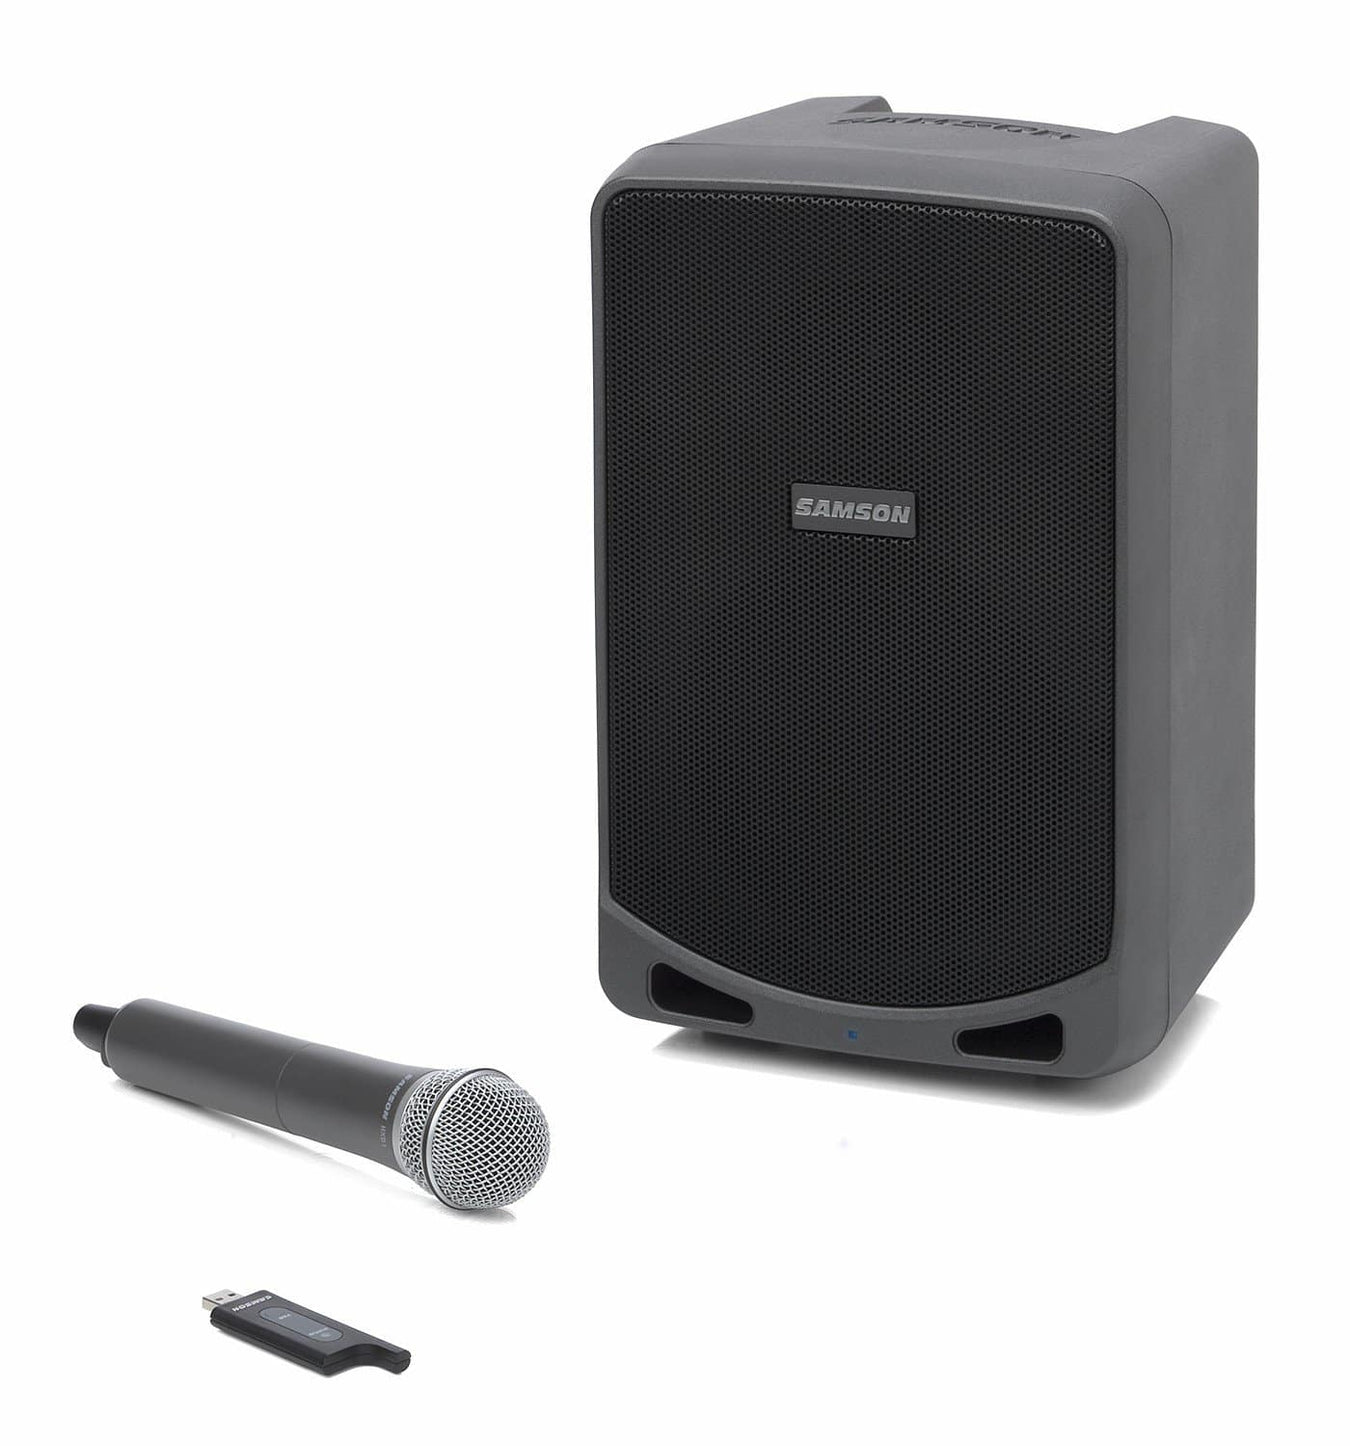 Portable Battery-Powered Speakers